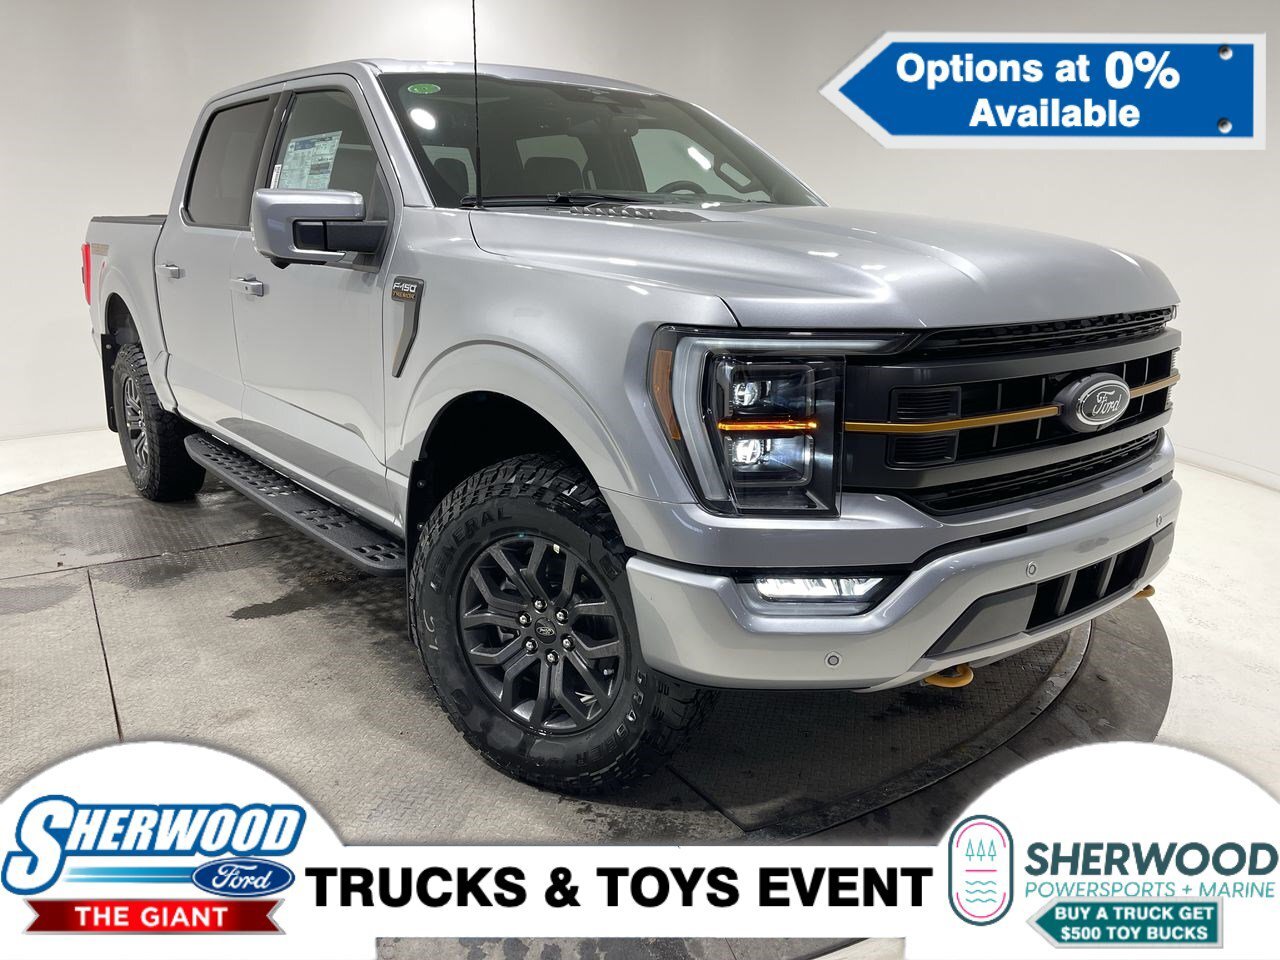 2023 Ford F-150 Tremor - 402A - MOONROOF